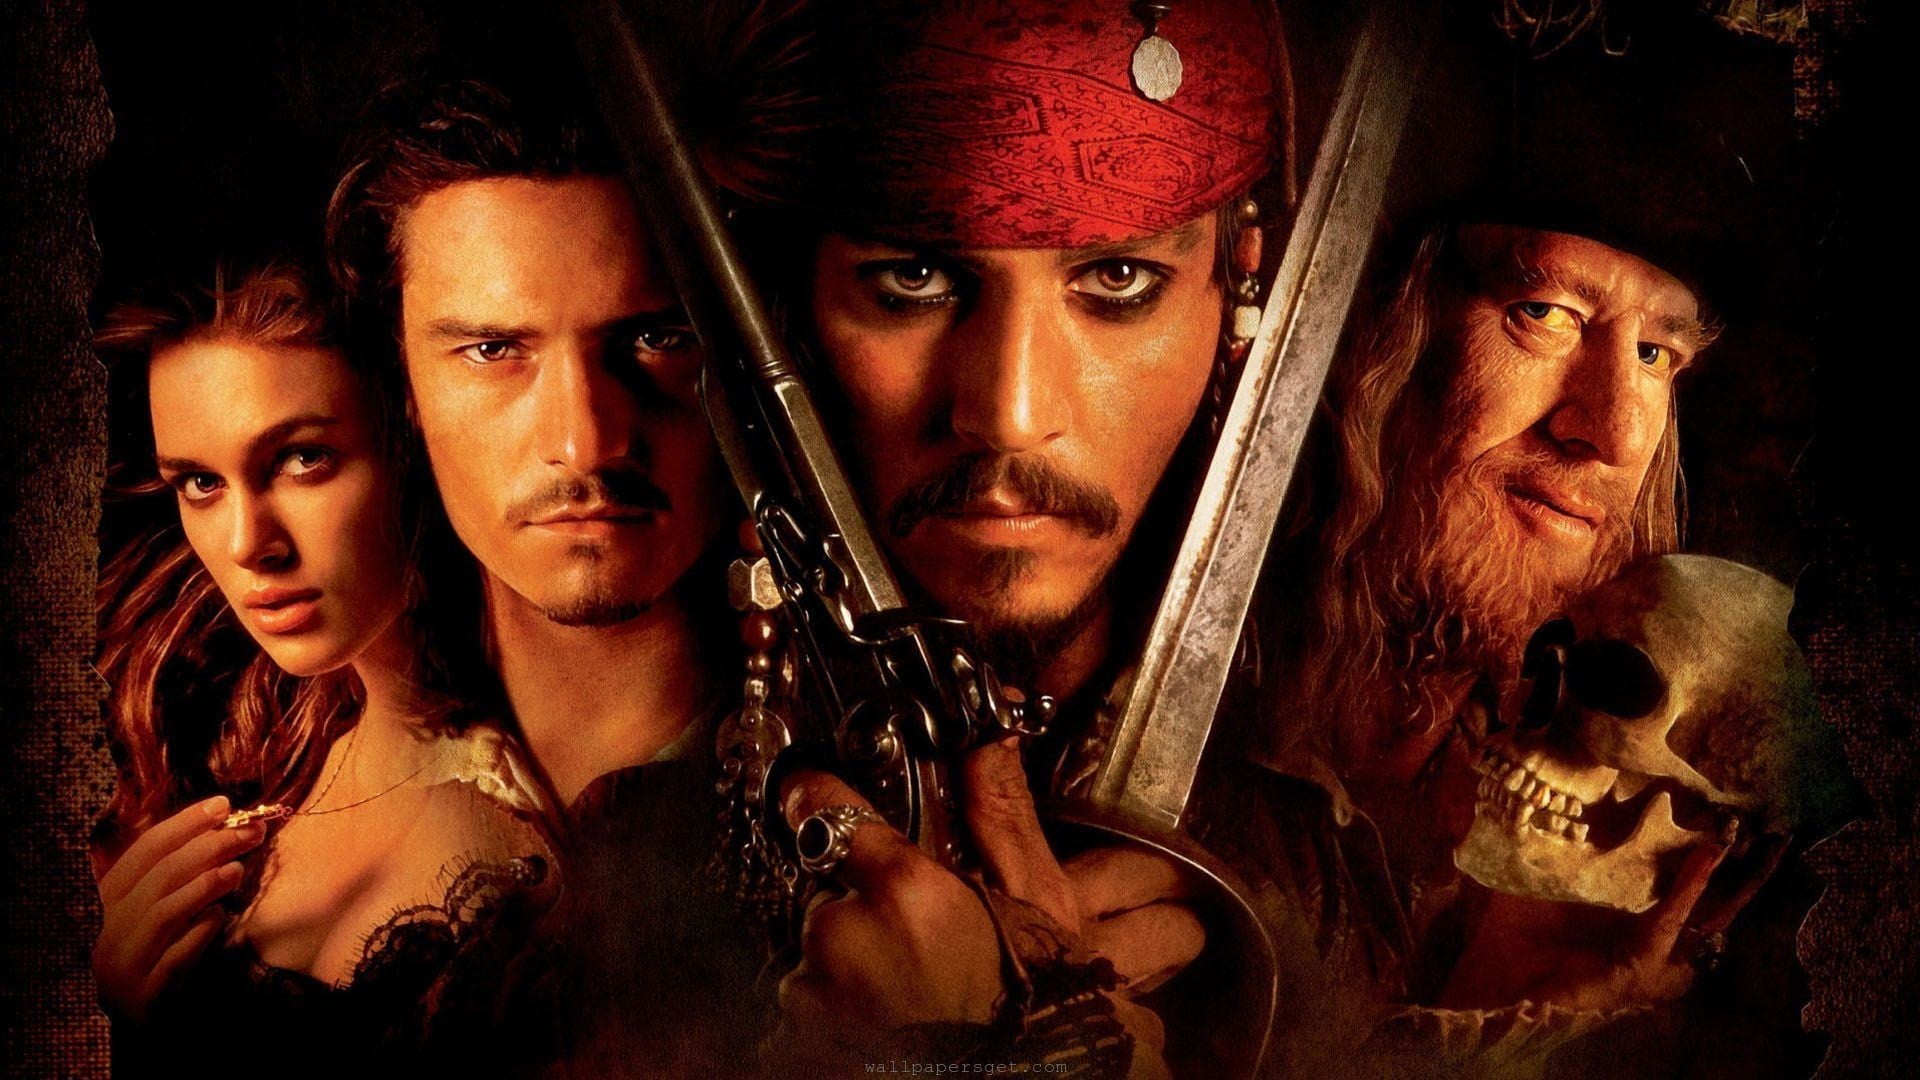 Pirate of Caribbean wallpaper, movies, Pirates of the Caribbean: The Curse of the Black Pearl